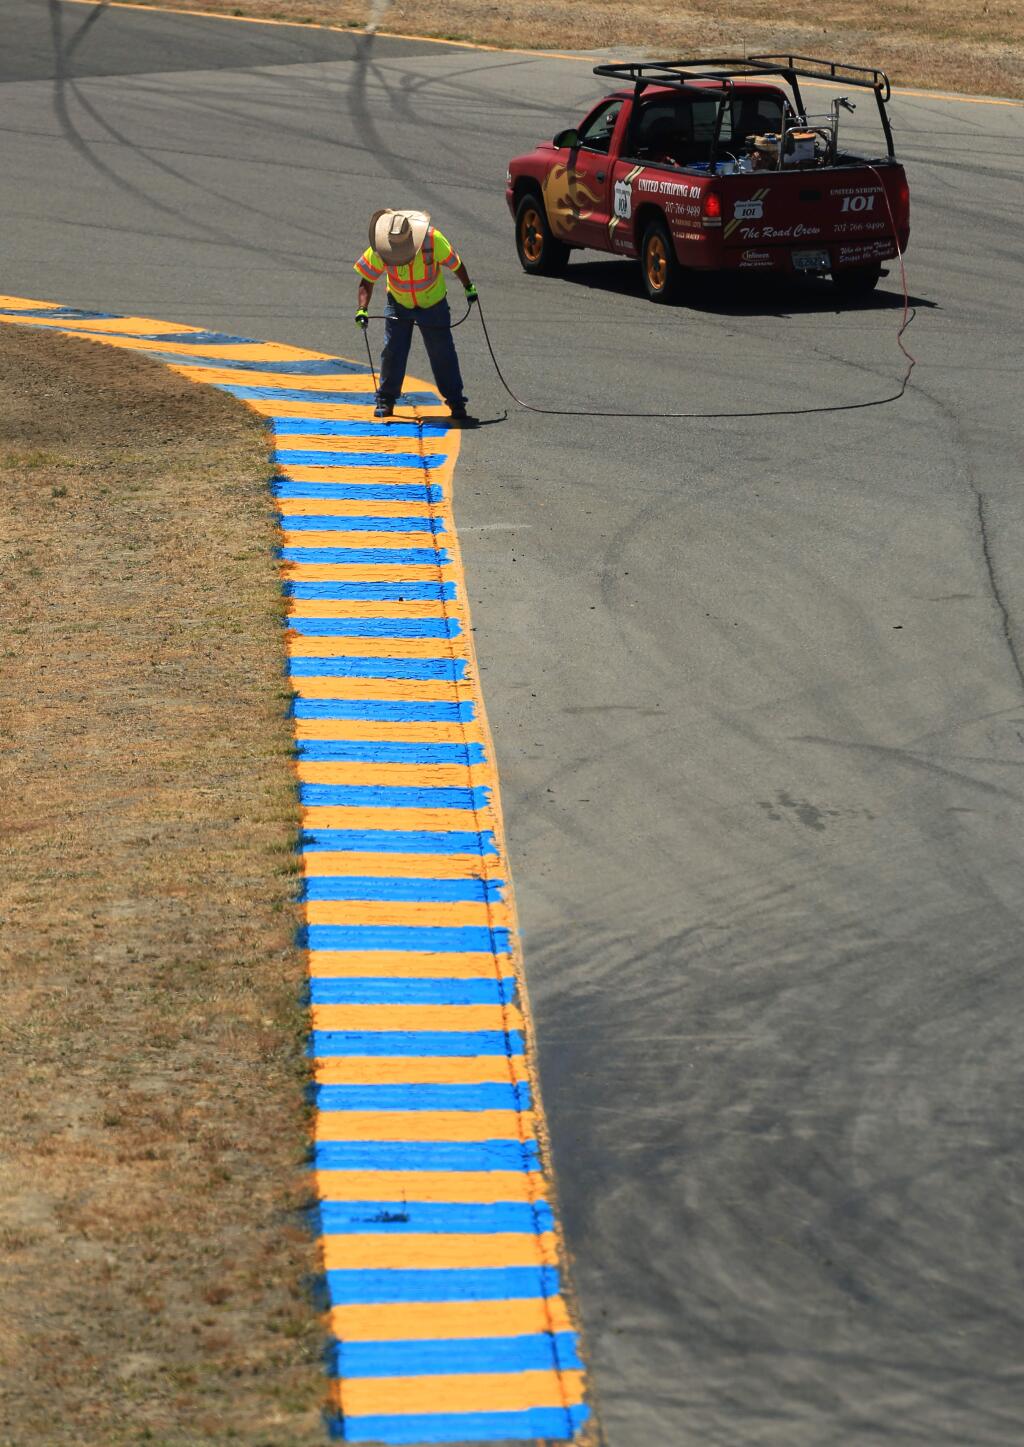 A rumble strip is touched up by an employee of 101 Striping on turn 7 Sonoma Raceway,Wednesday June 25, 2015 in Sonoma in preparation for NASCAR events this weekend . (Kent Porter / Press Democrat) 2015